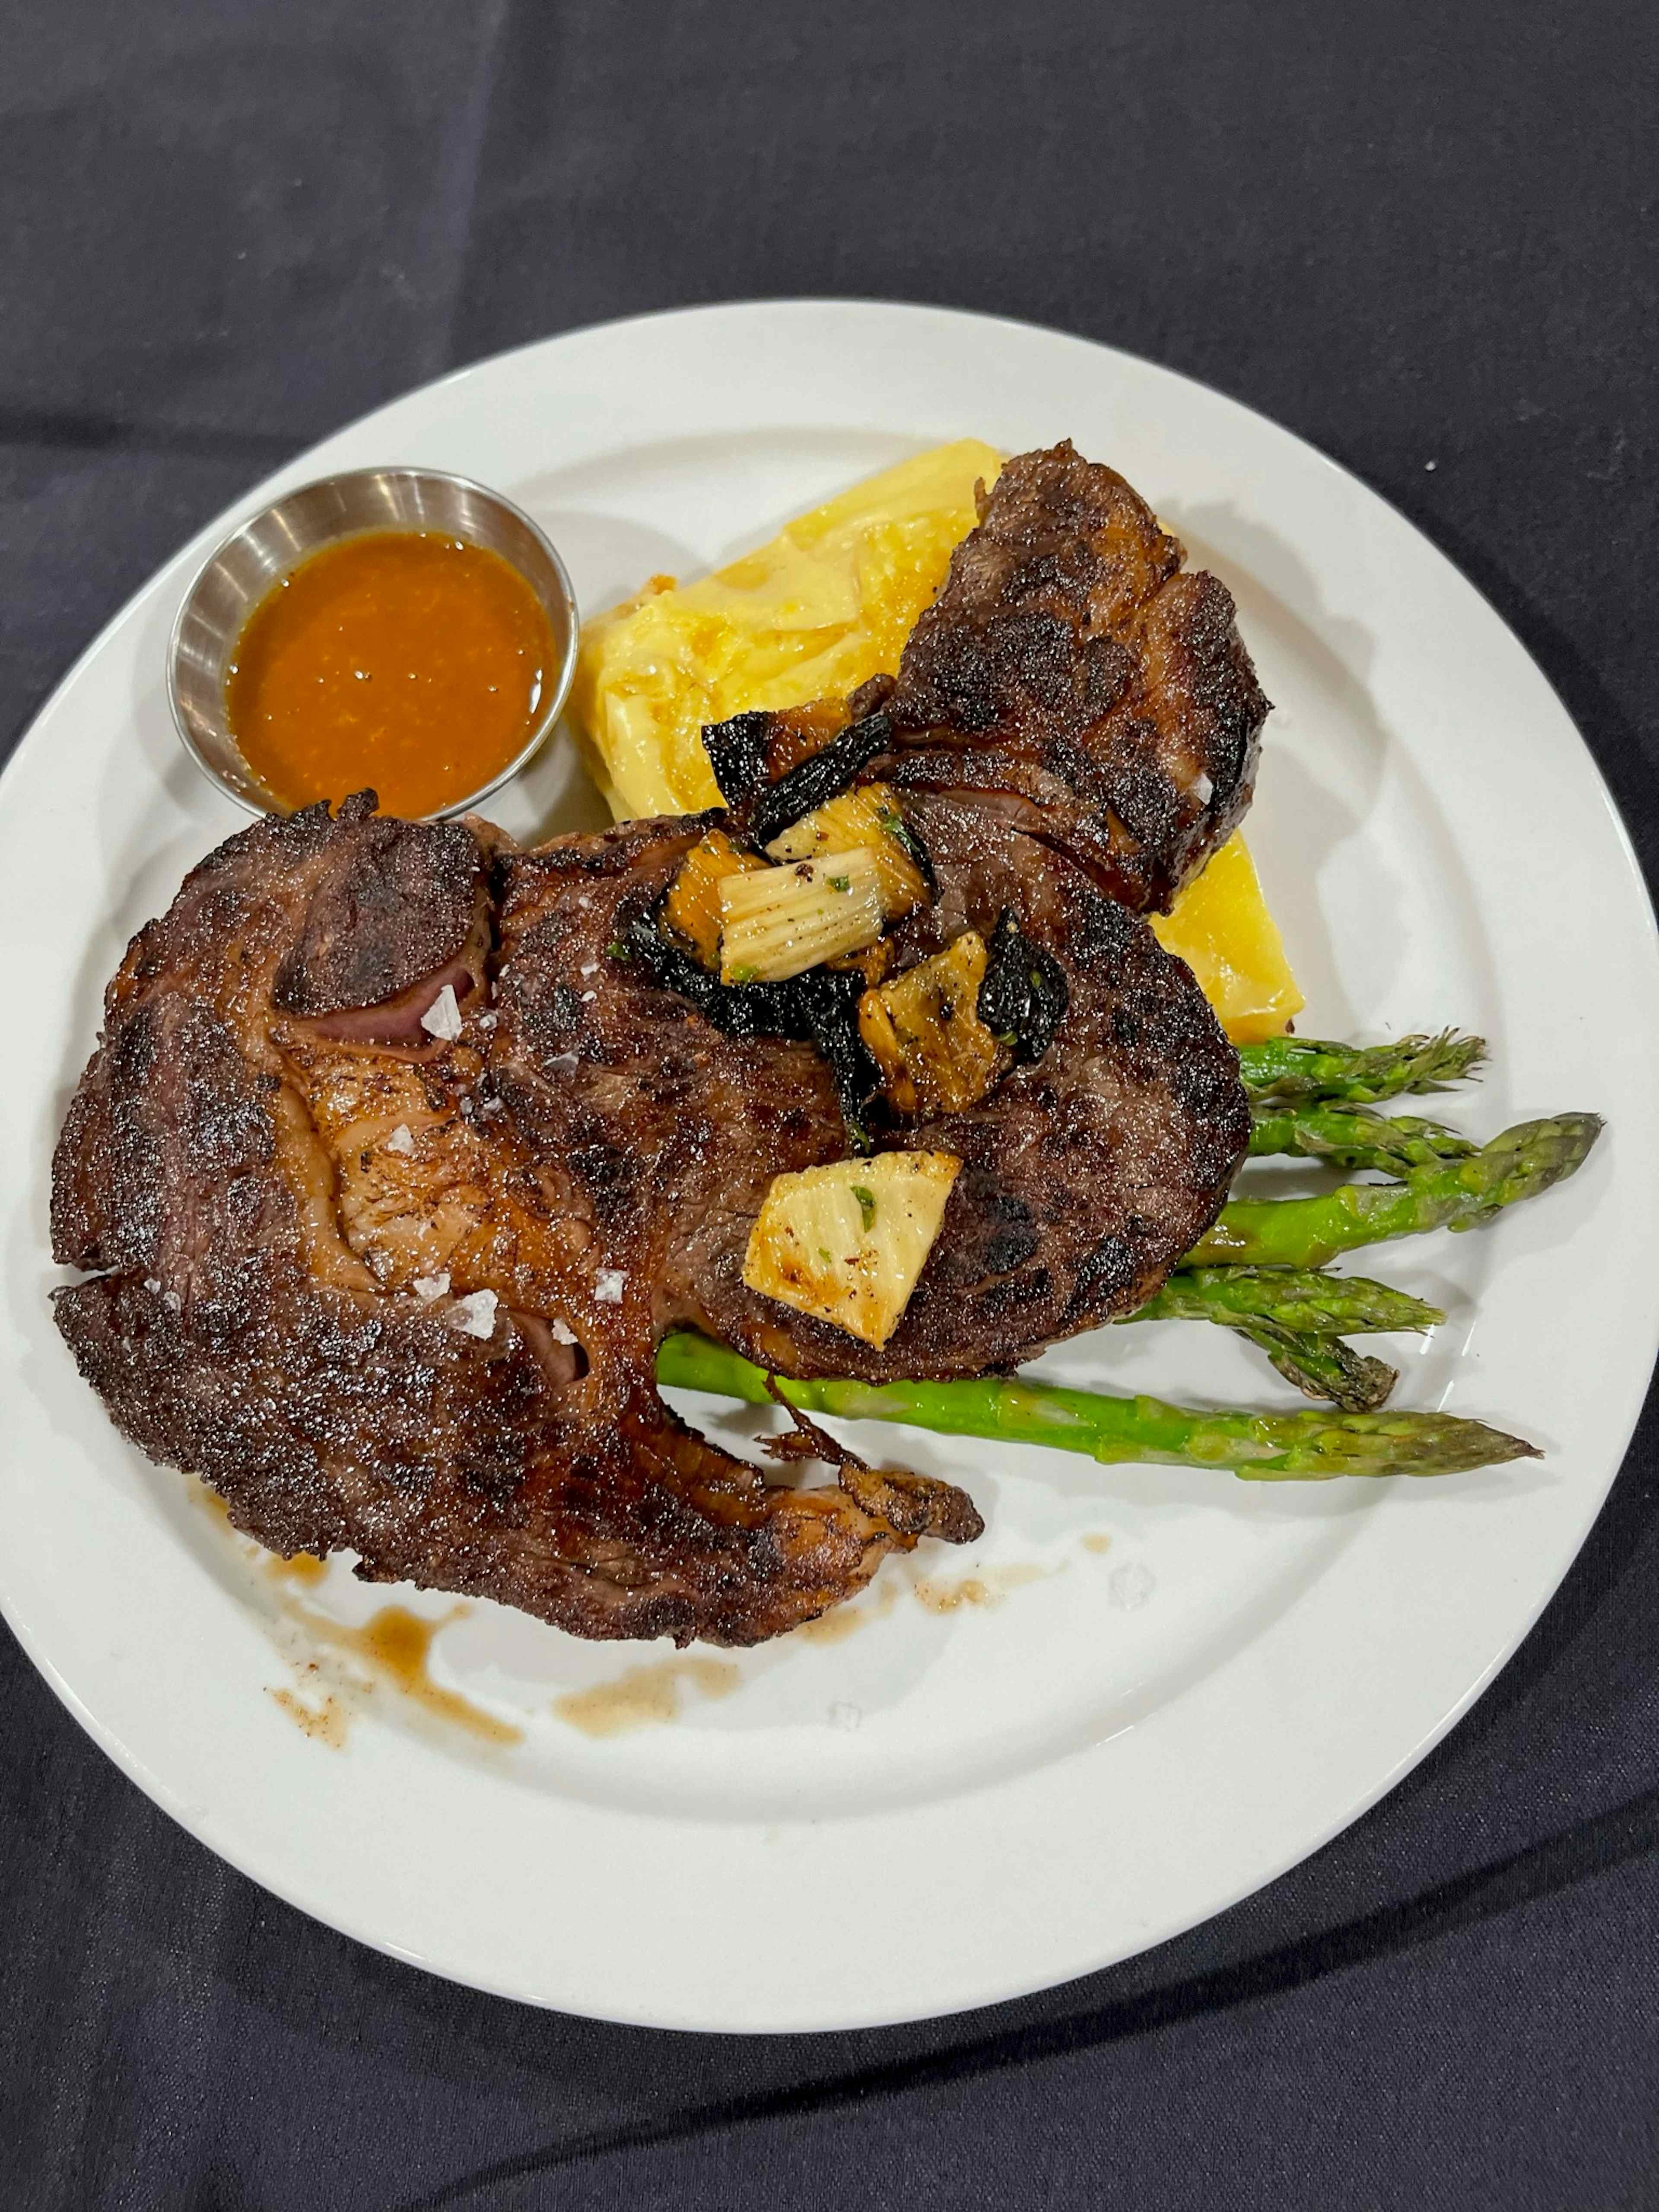 The Teton Valley Lodge in the Yellowstone Teton Territory offers an array of world-class meals, including the pictured perfectly-grilled steak atop a bed of asparagus